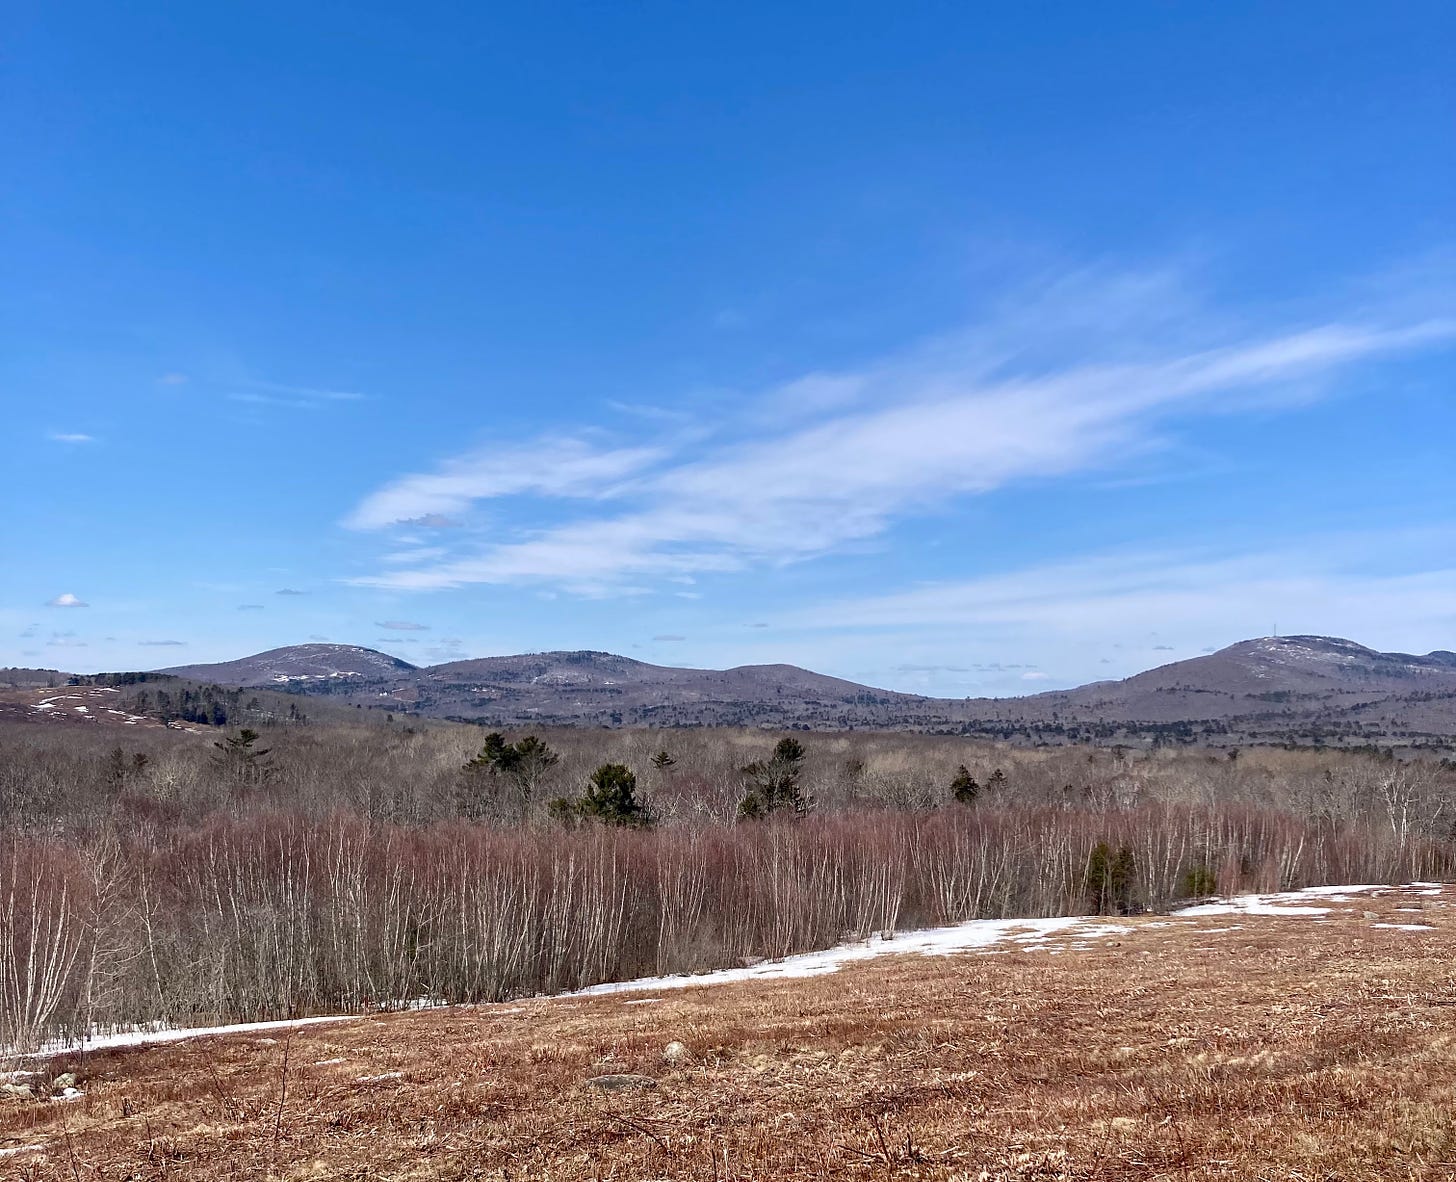 A view of hills and blue sky from a hike. Some snow remains visible, although most has melted.